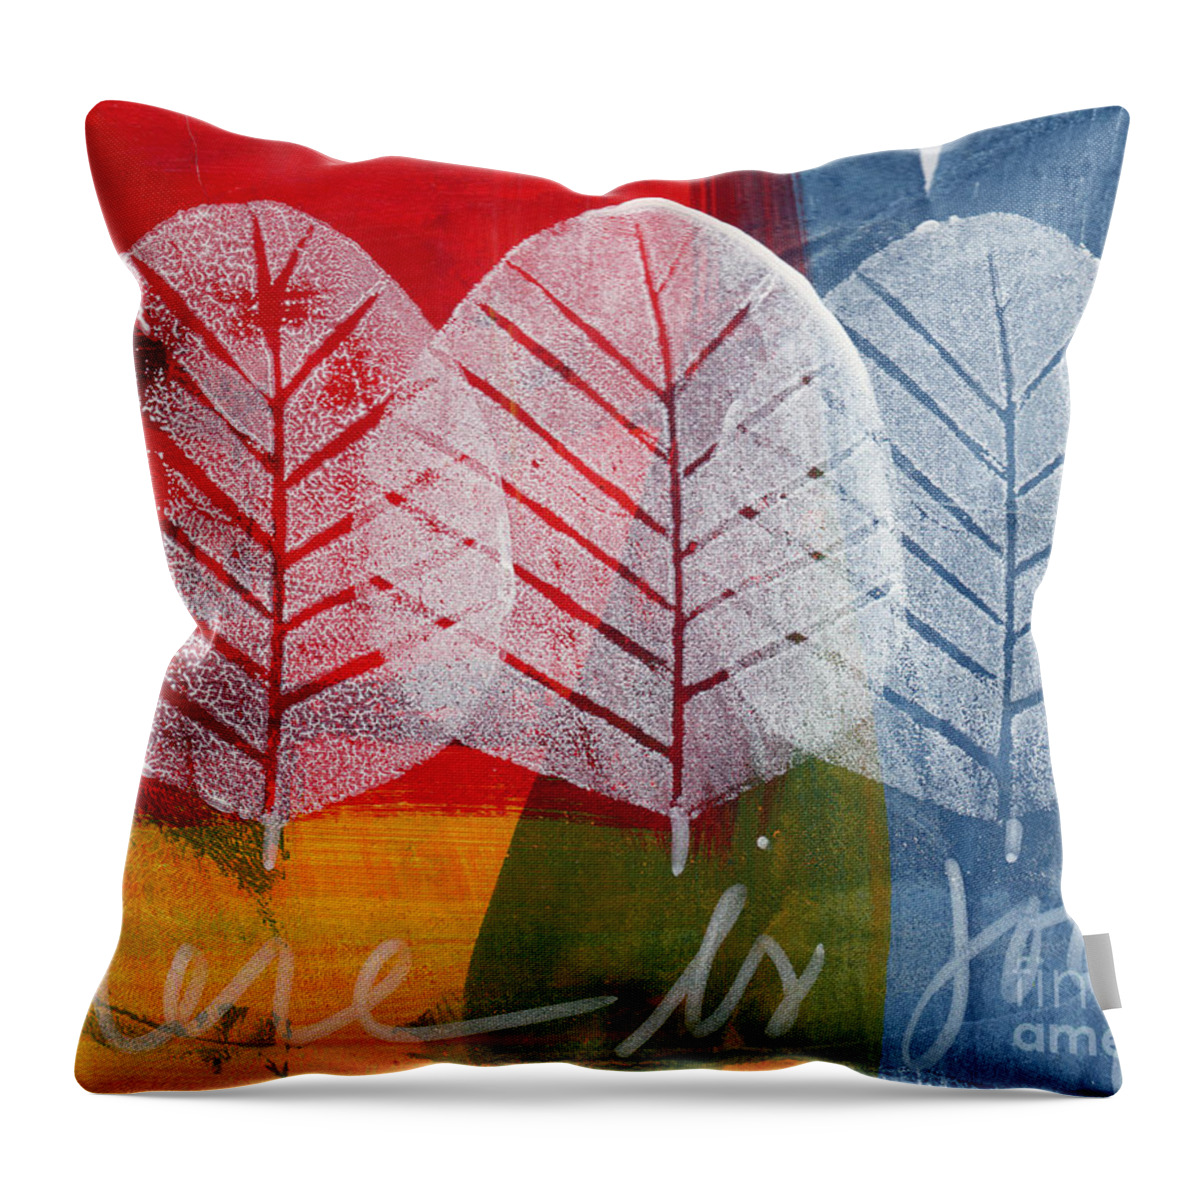 Abstract Throw Pillow featuring the painting There Is Joy by Linda Woods